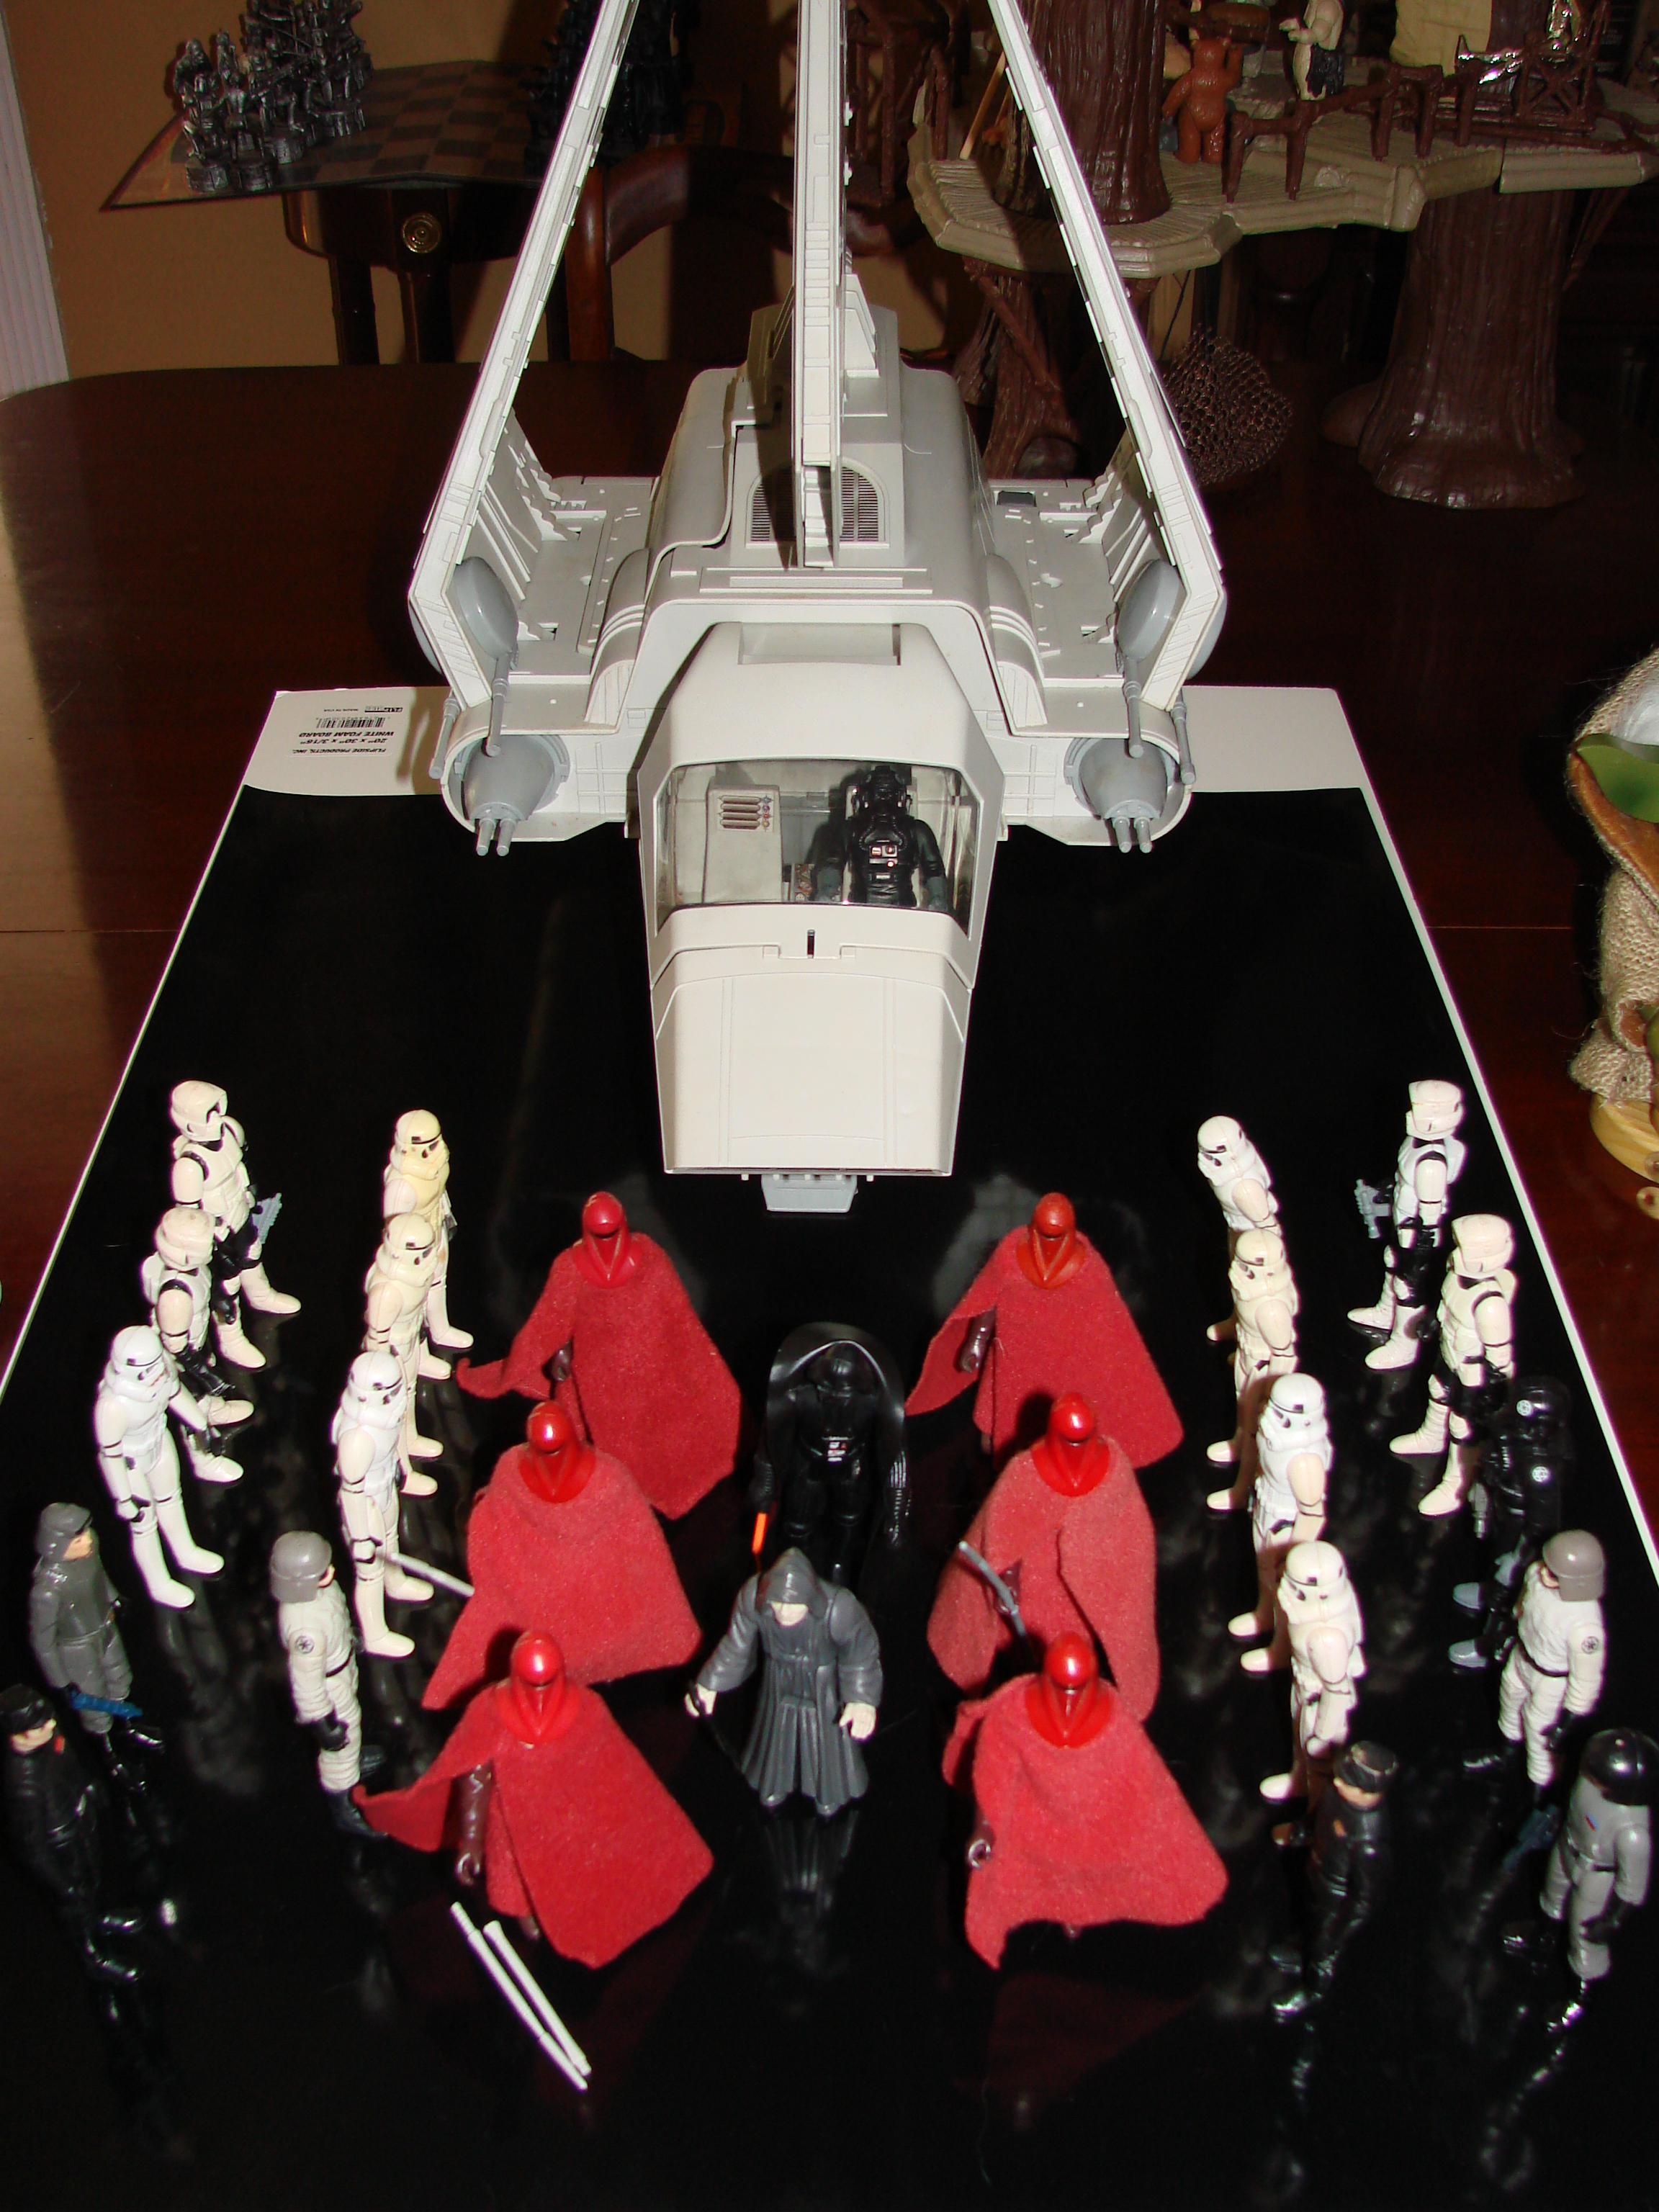 star wars imperial vehicles